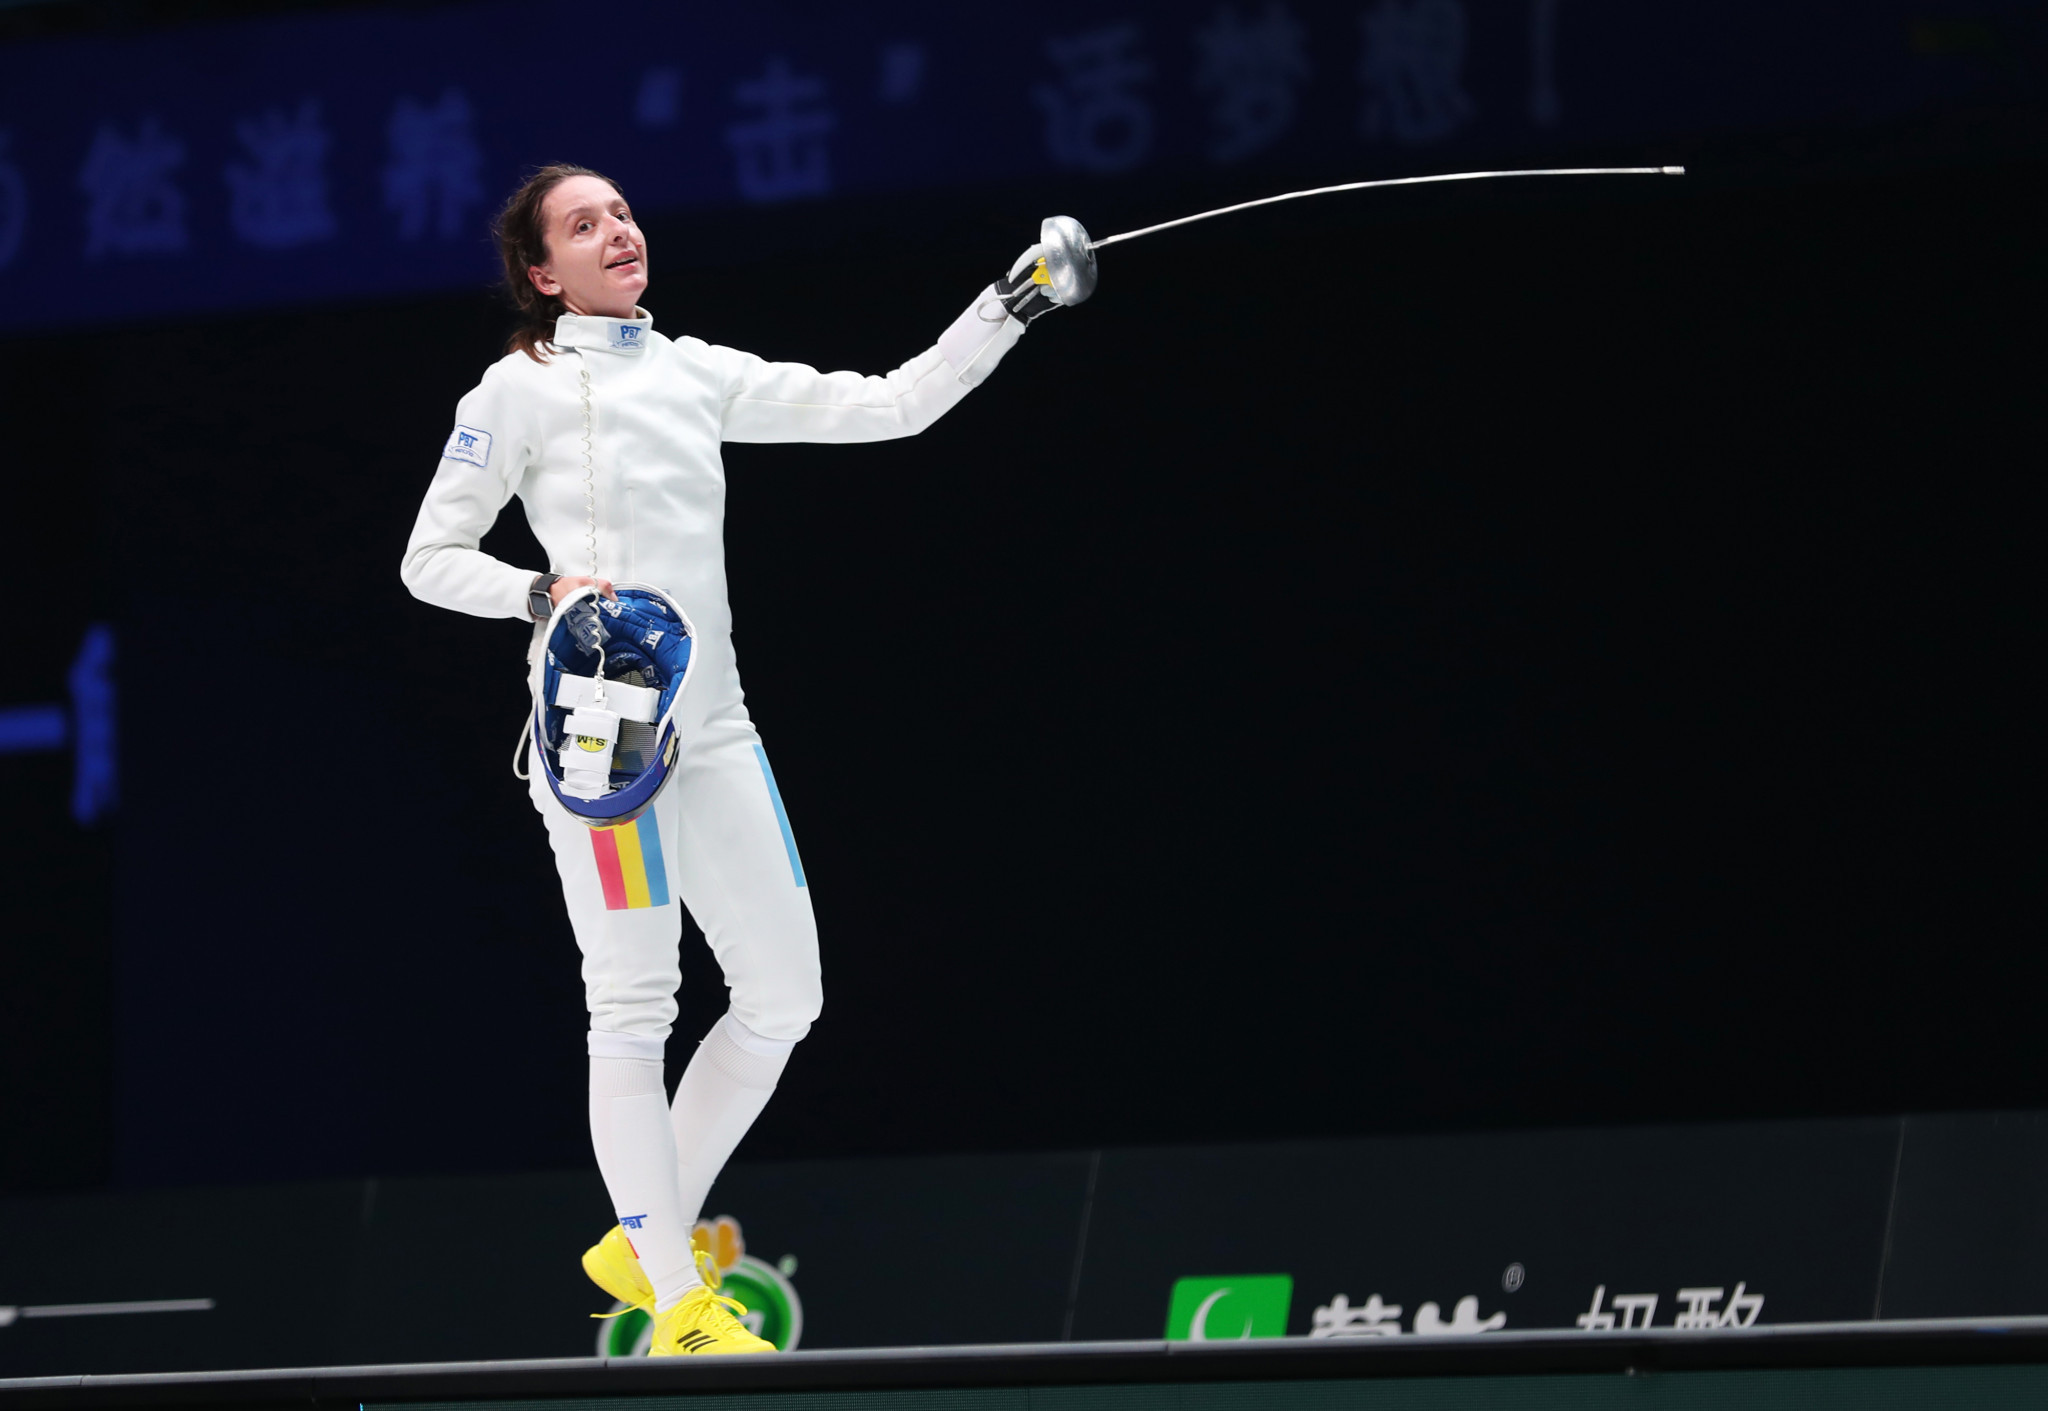 Romania's Olympic silver medallist Ana Maria Popescu discovered her last-64 opponent will be France's Camille Nabeth at the FIE Épée Grand Prix in Doha ©Getty Images